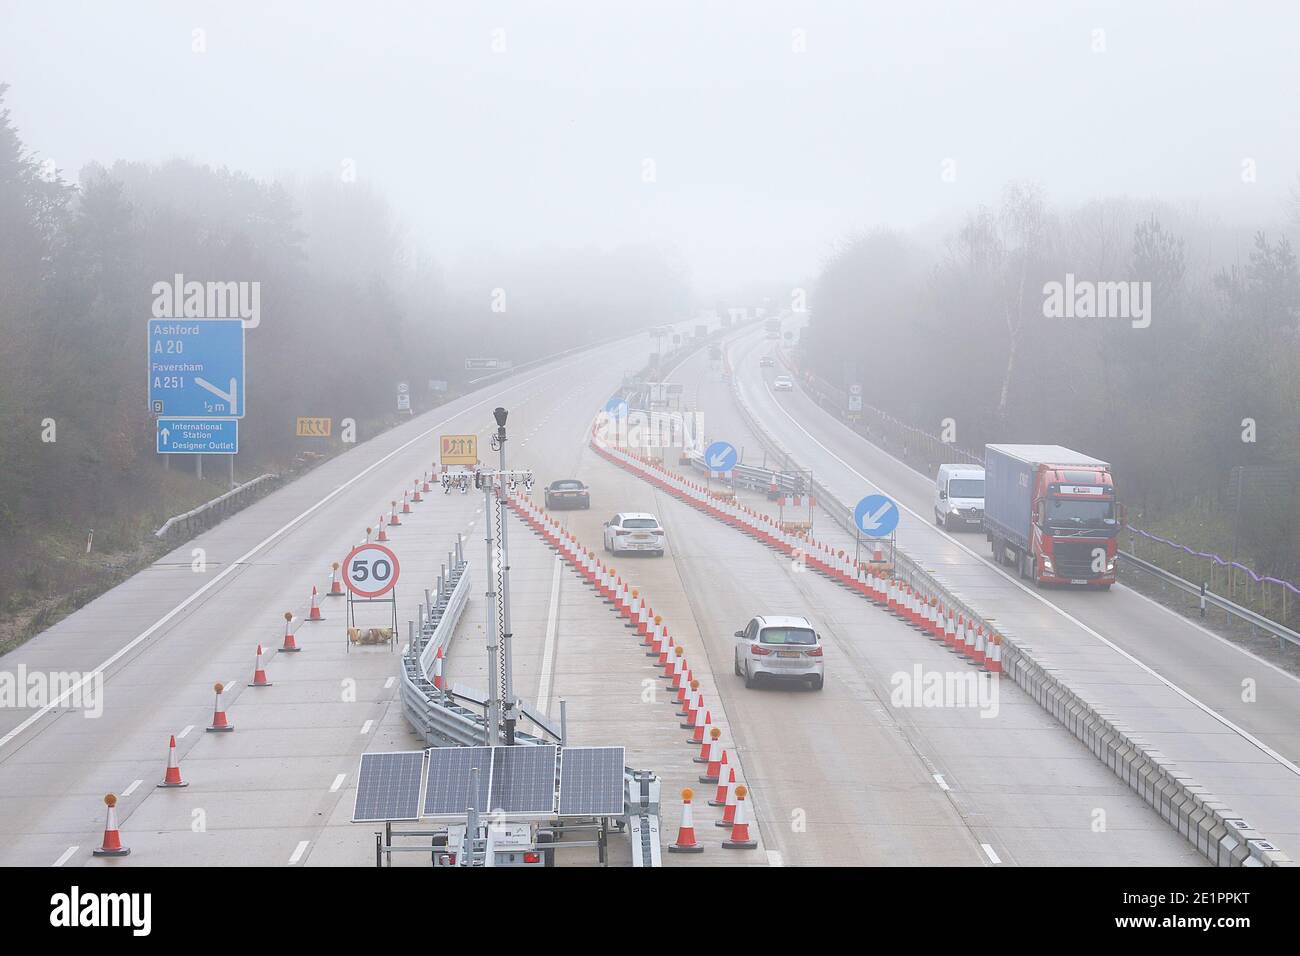 Ashford, Kent, UK. 09 Jan, 2021. UK Weather: Foggy weather on the M20 motorway near junction 9 in Ashford, Kent as Operation Brock is still in place, whereby the London lane is used by both directions for traffic. Photo Credit: Paul Lawrenson/Alamy Live News Stock Photo